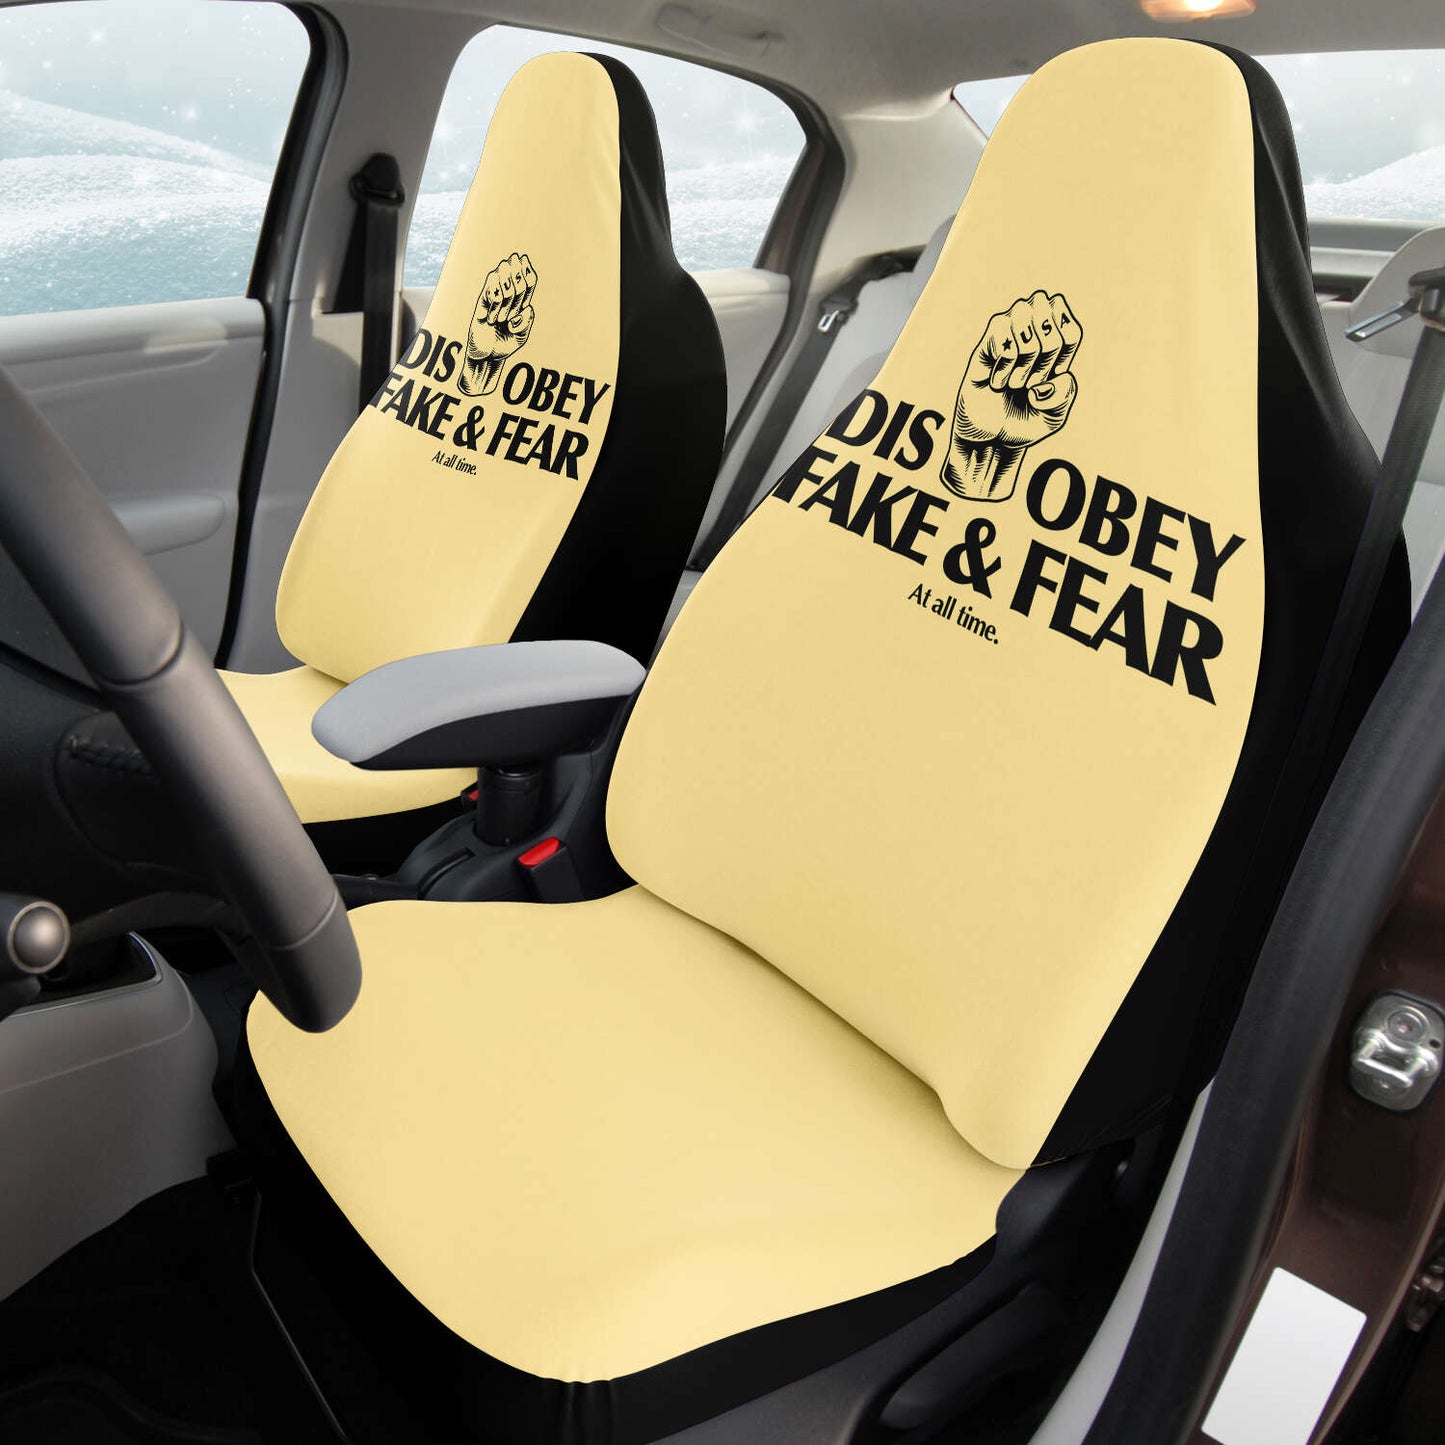 Disobey ✊🏻 Fake <br> & Fear At All Time <br> Seat Covers Cream